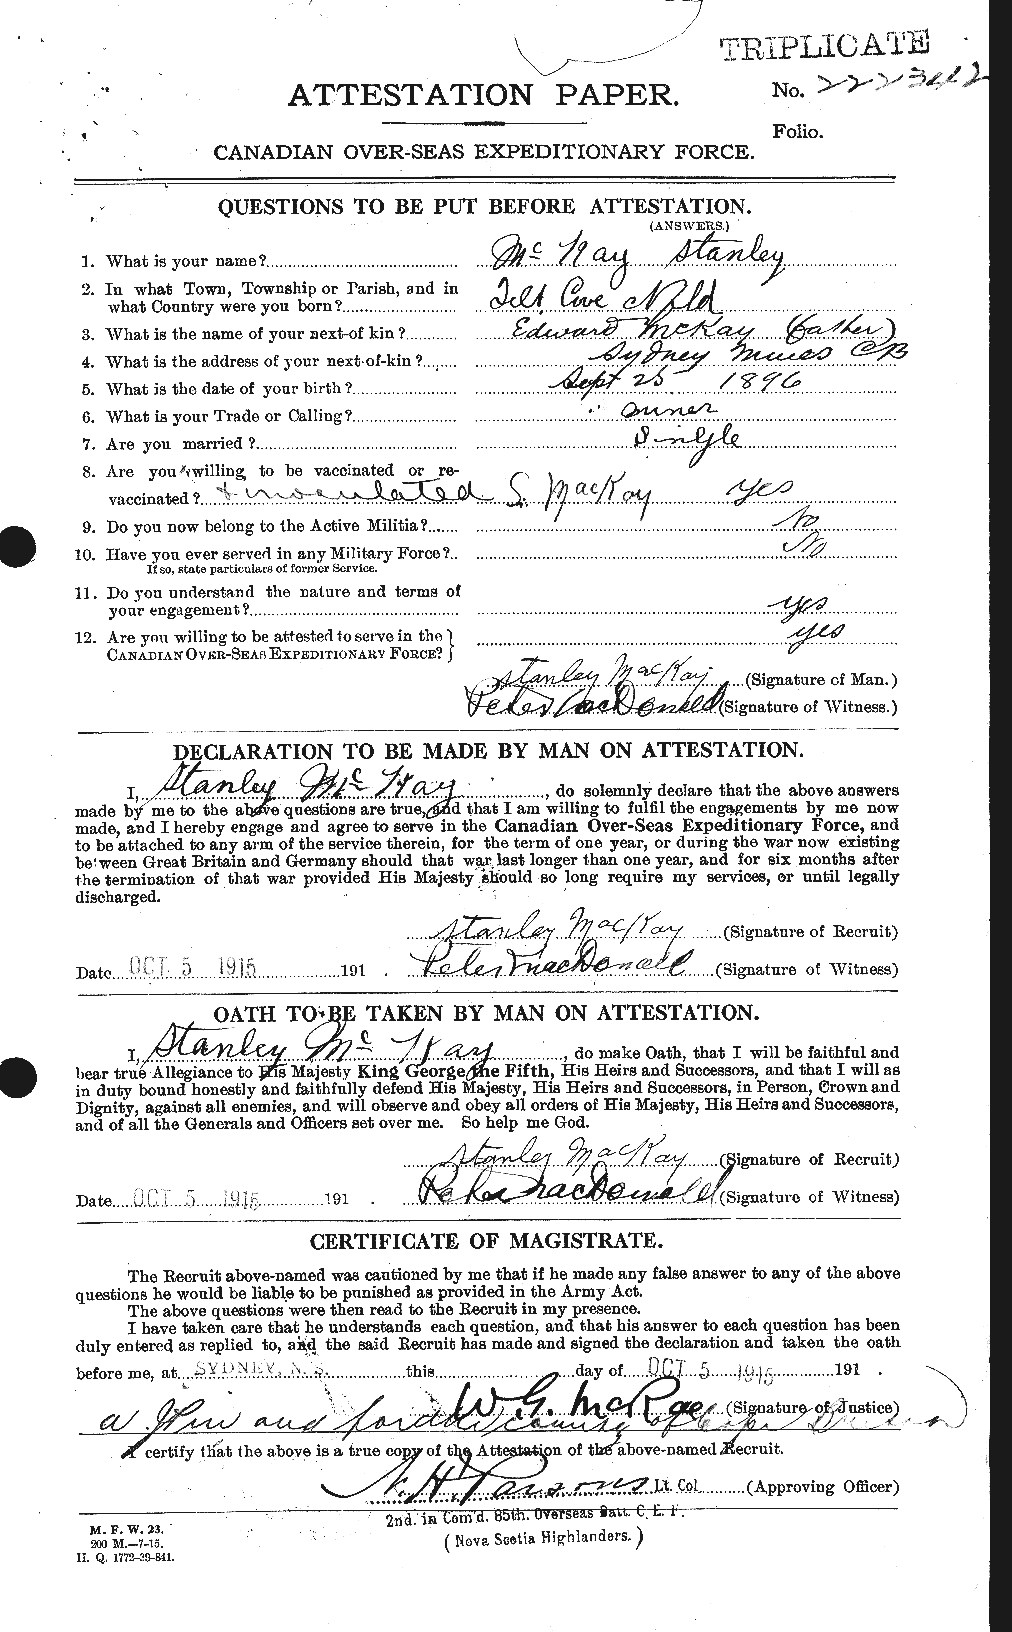 Personnel Records of the First World War - CEF 530141a